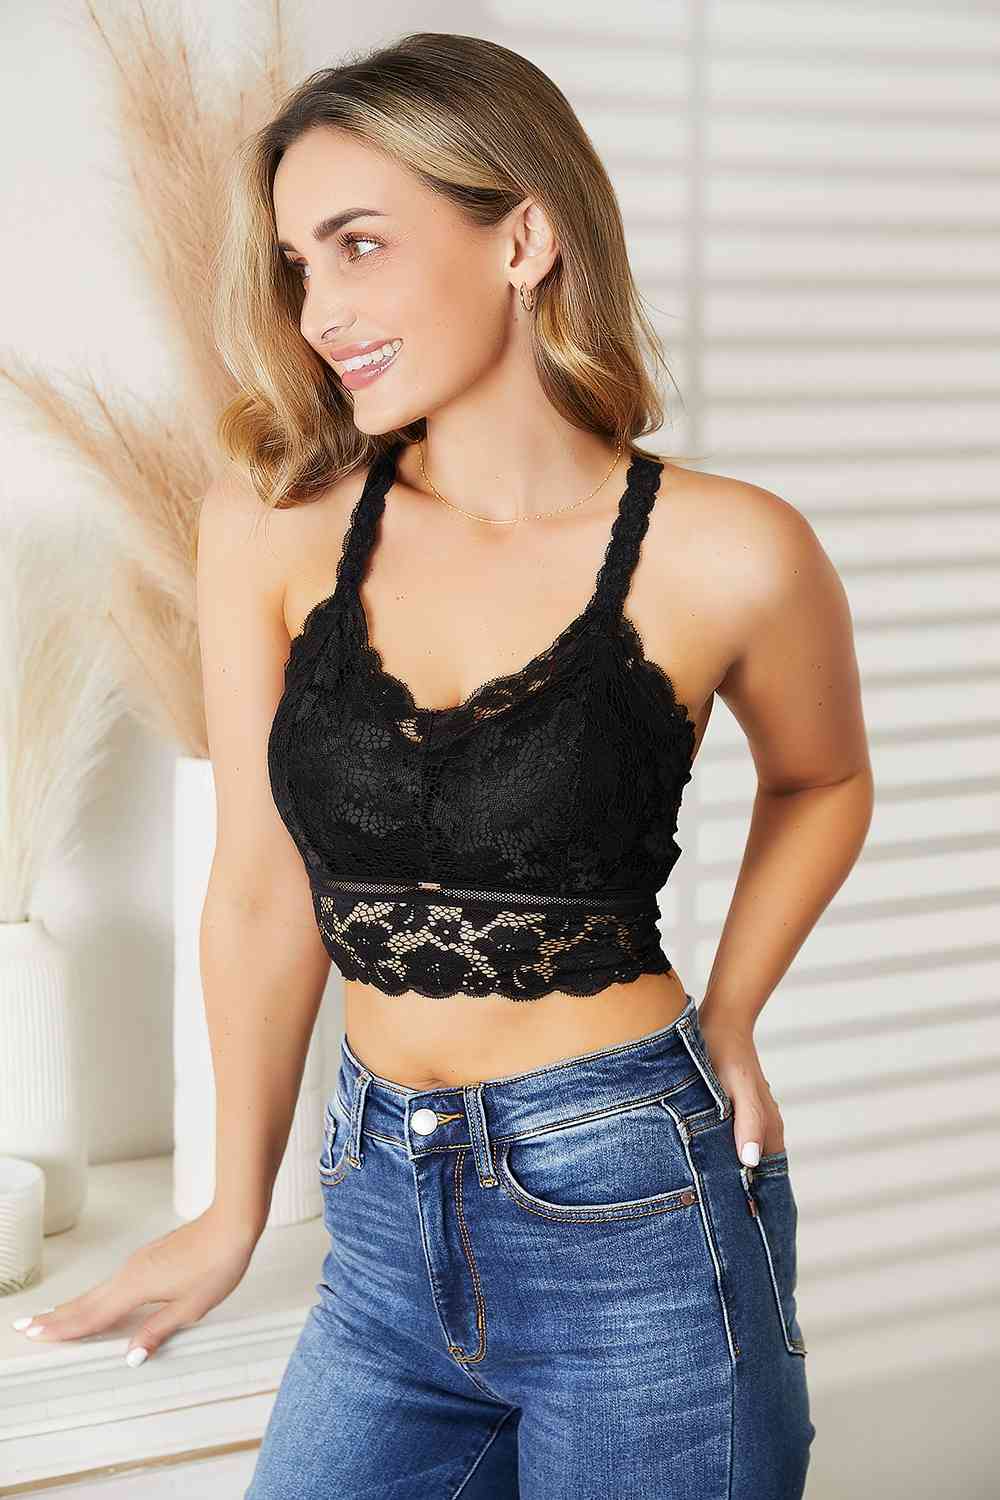 WITH EASE lady noir bralette